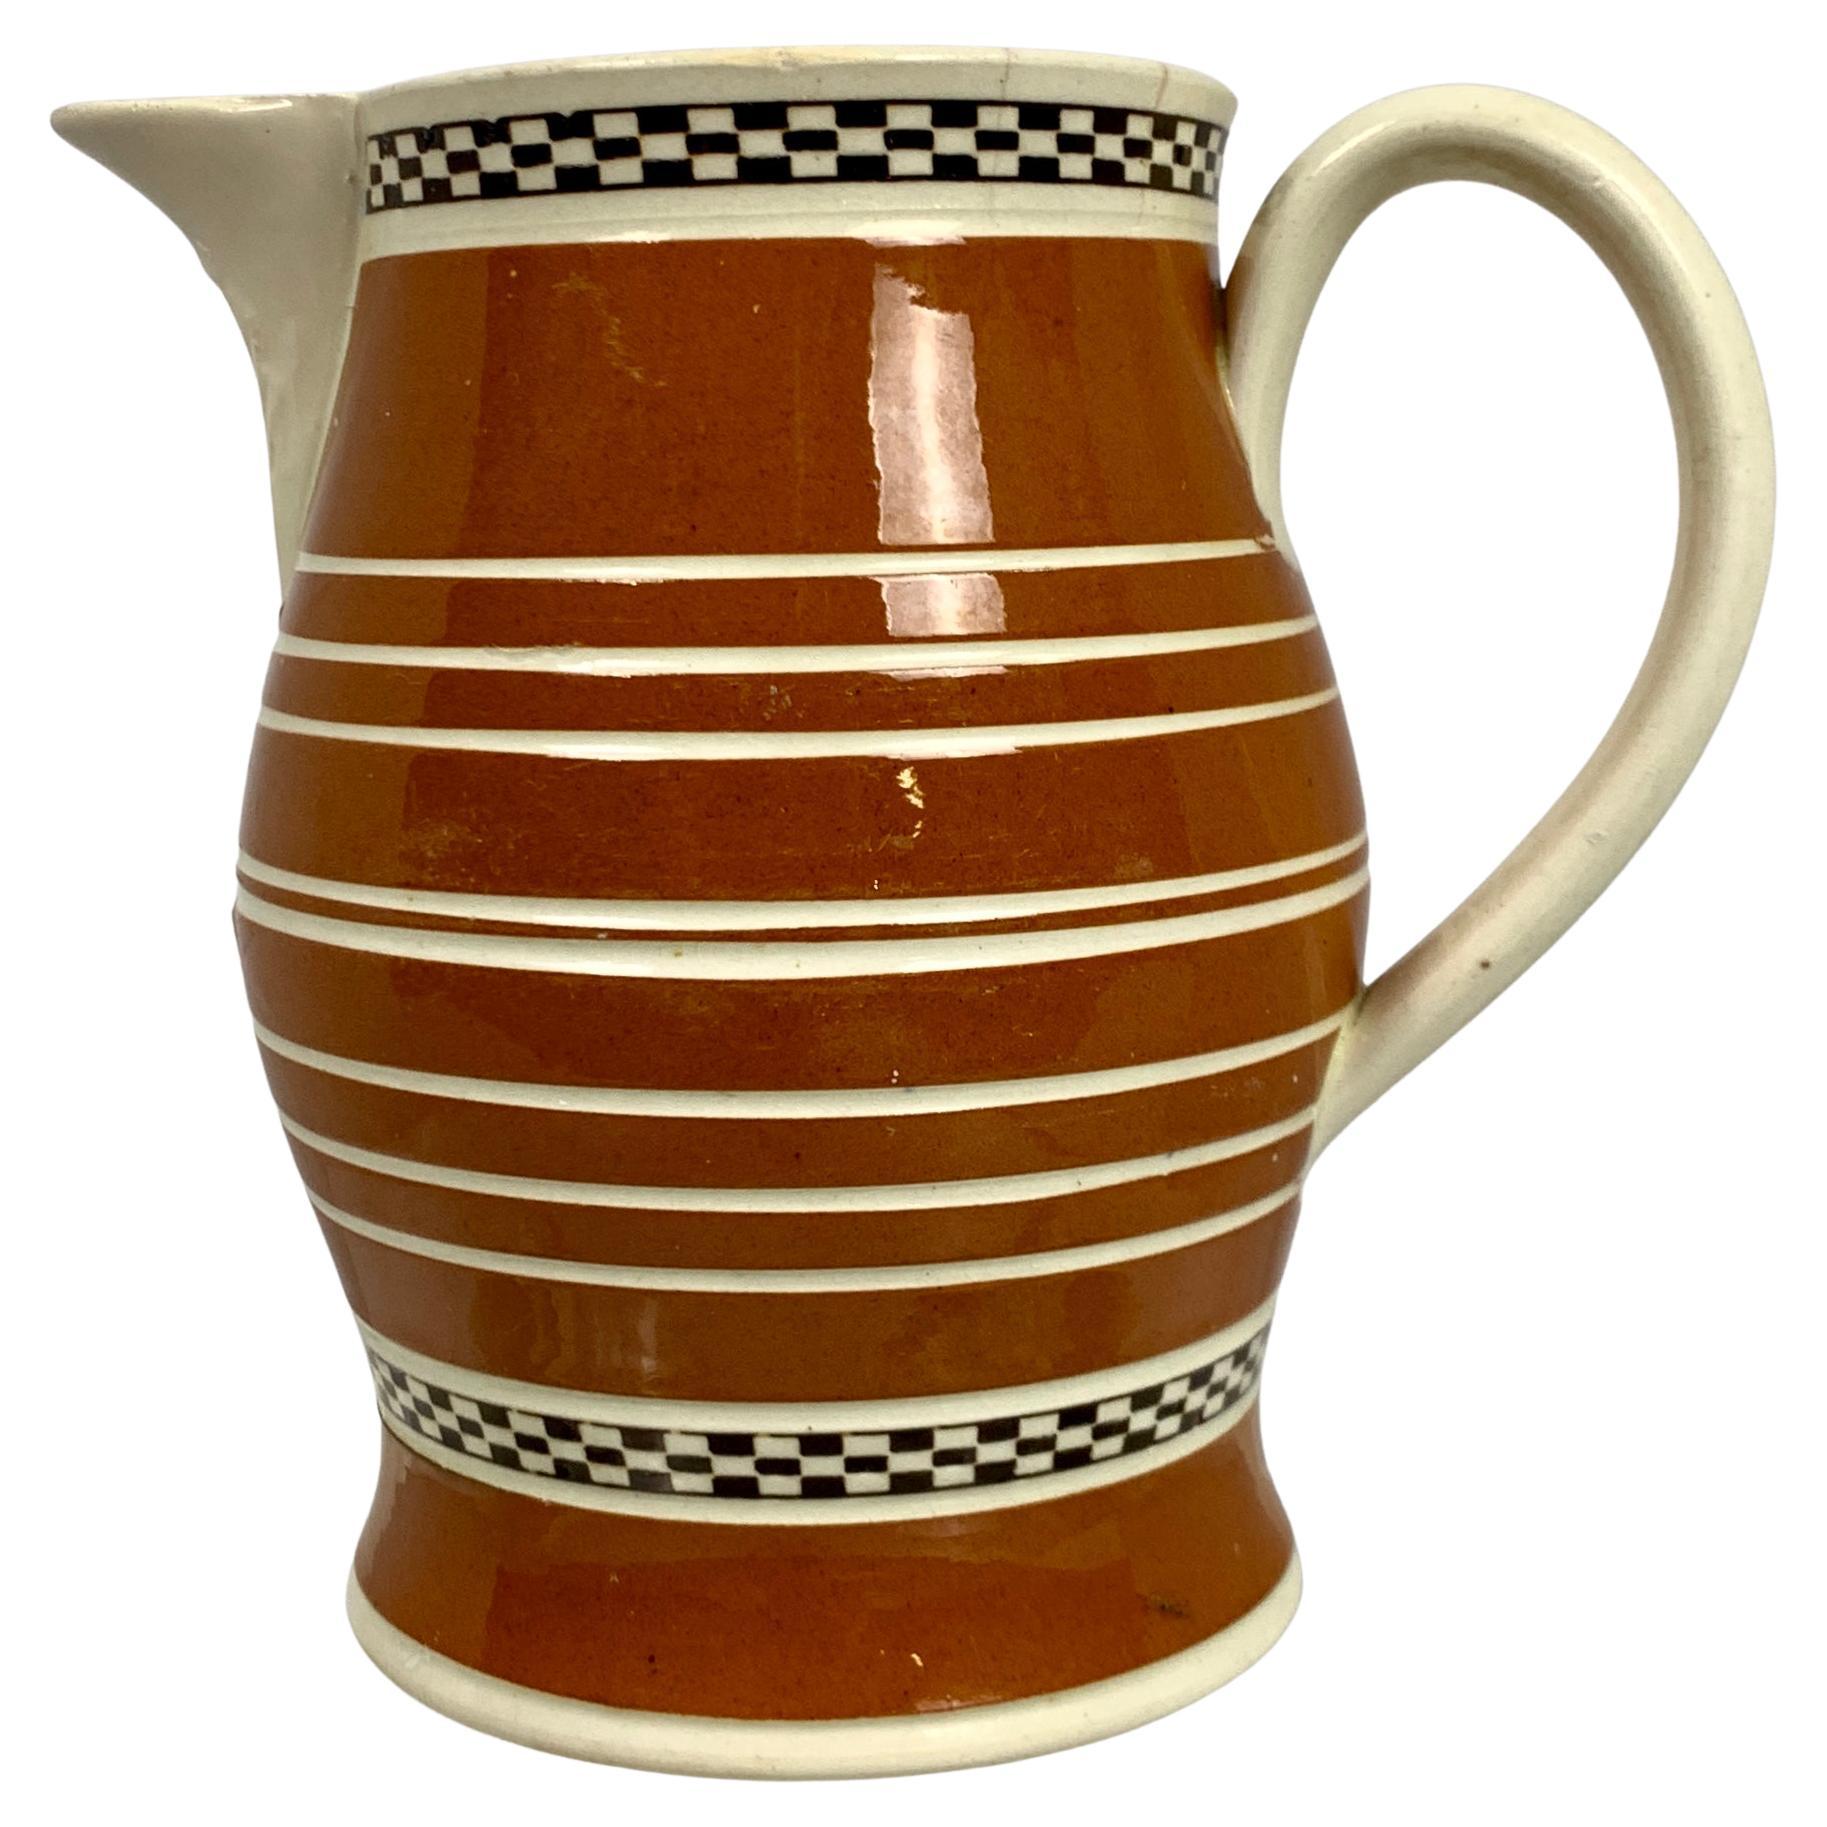 Mochaware Pitcher Decorated with Chocolate Brown Slip England circa 1815